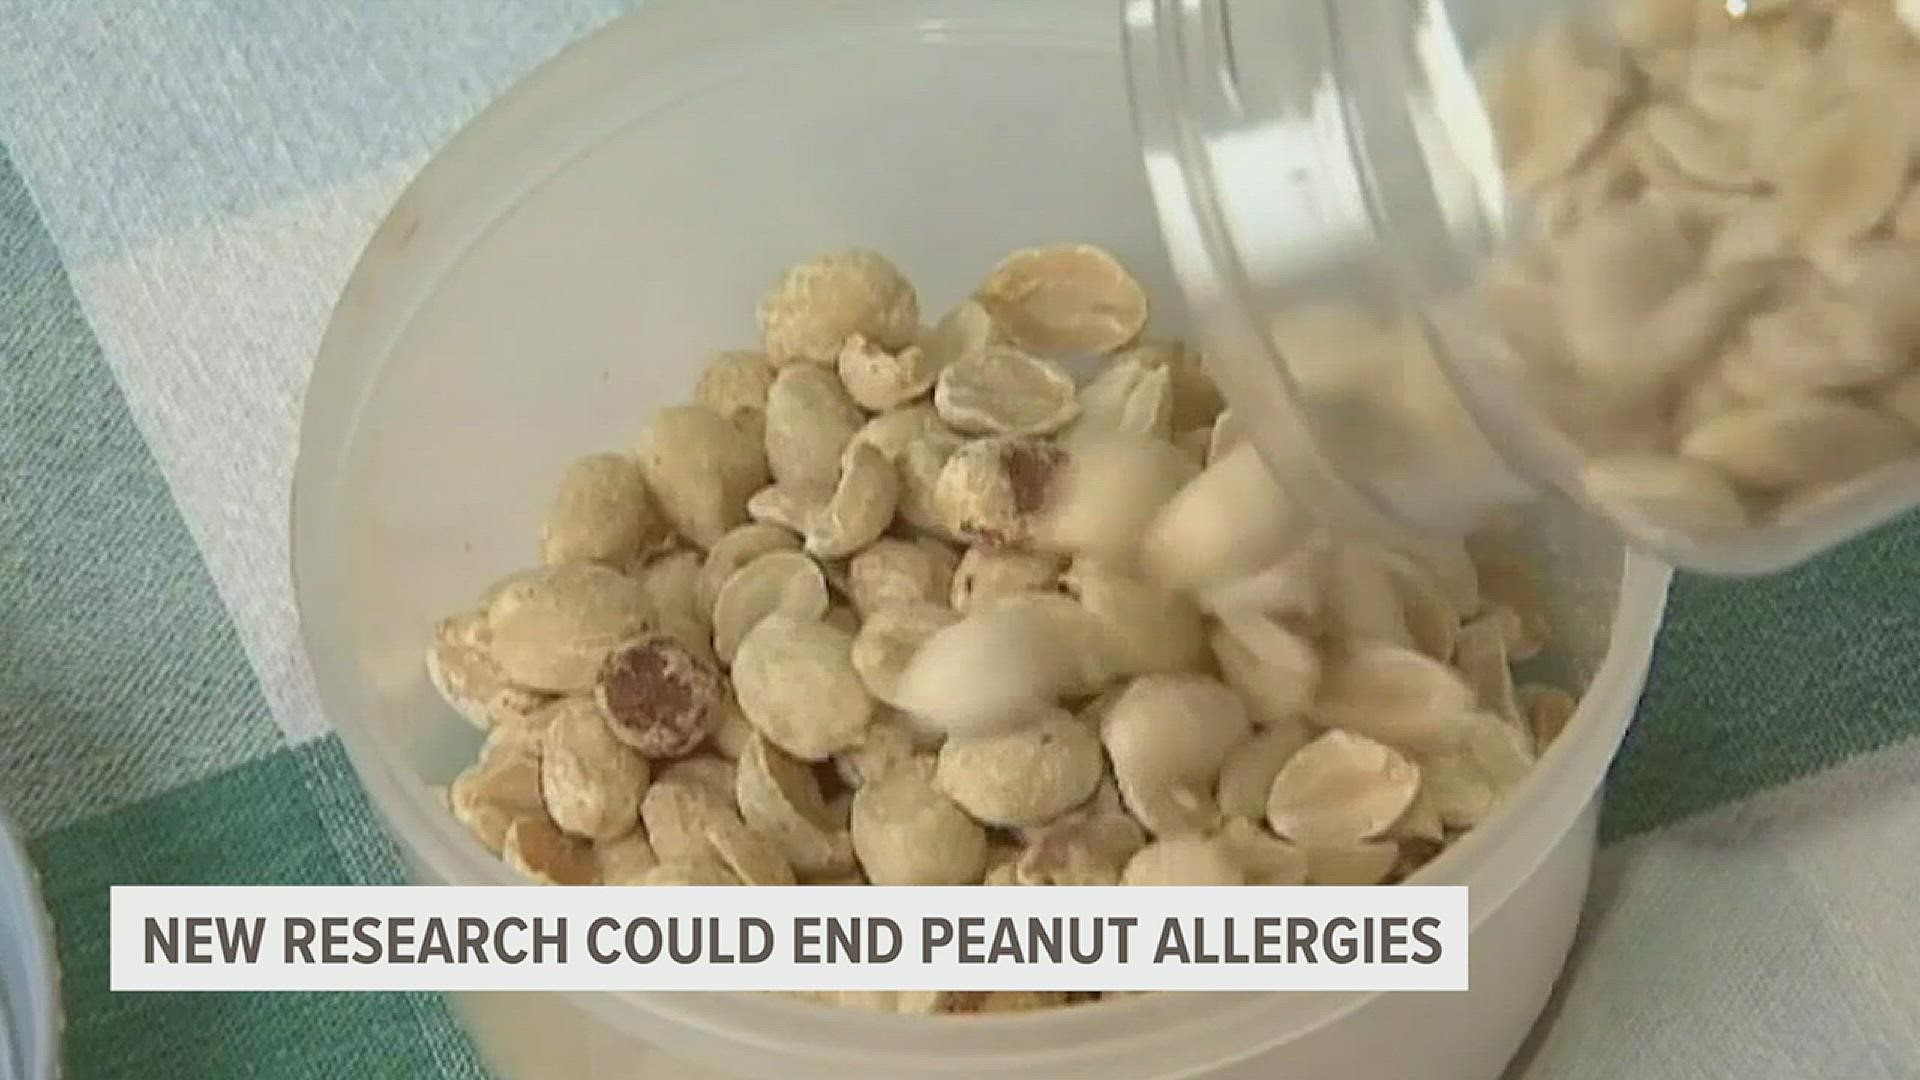 Scientists from Indiana University say their injection can prevent allergic reactions from peanuts, and are eyeing other allergies to target in the future.